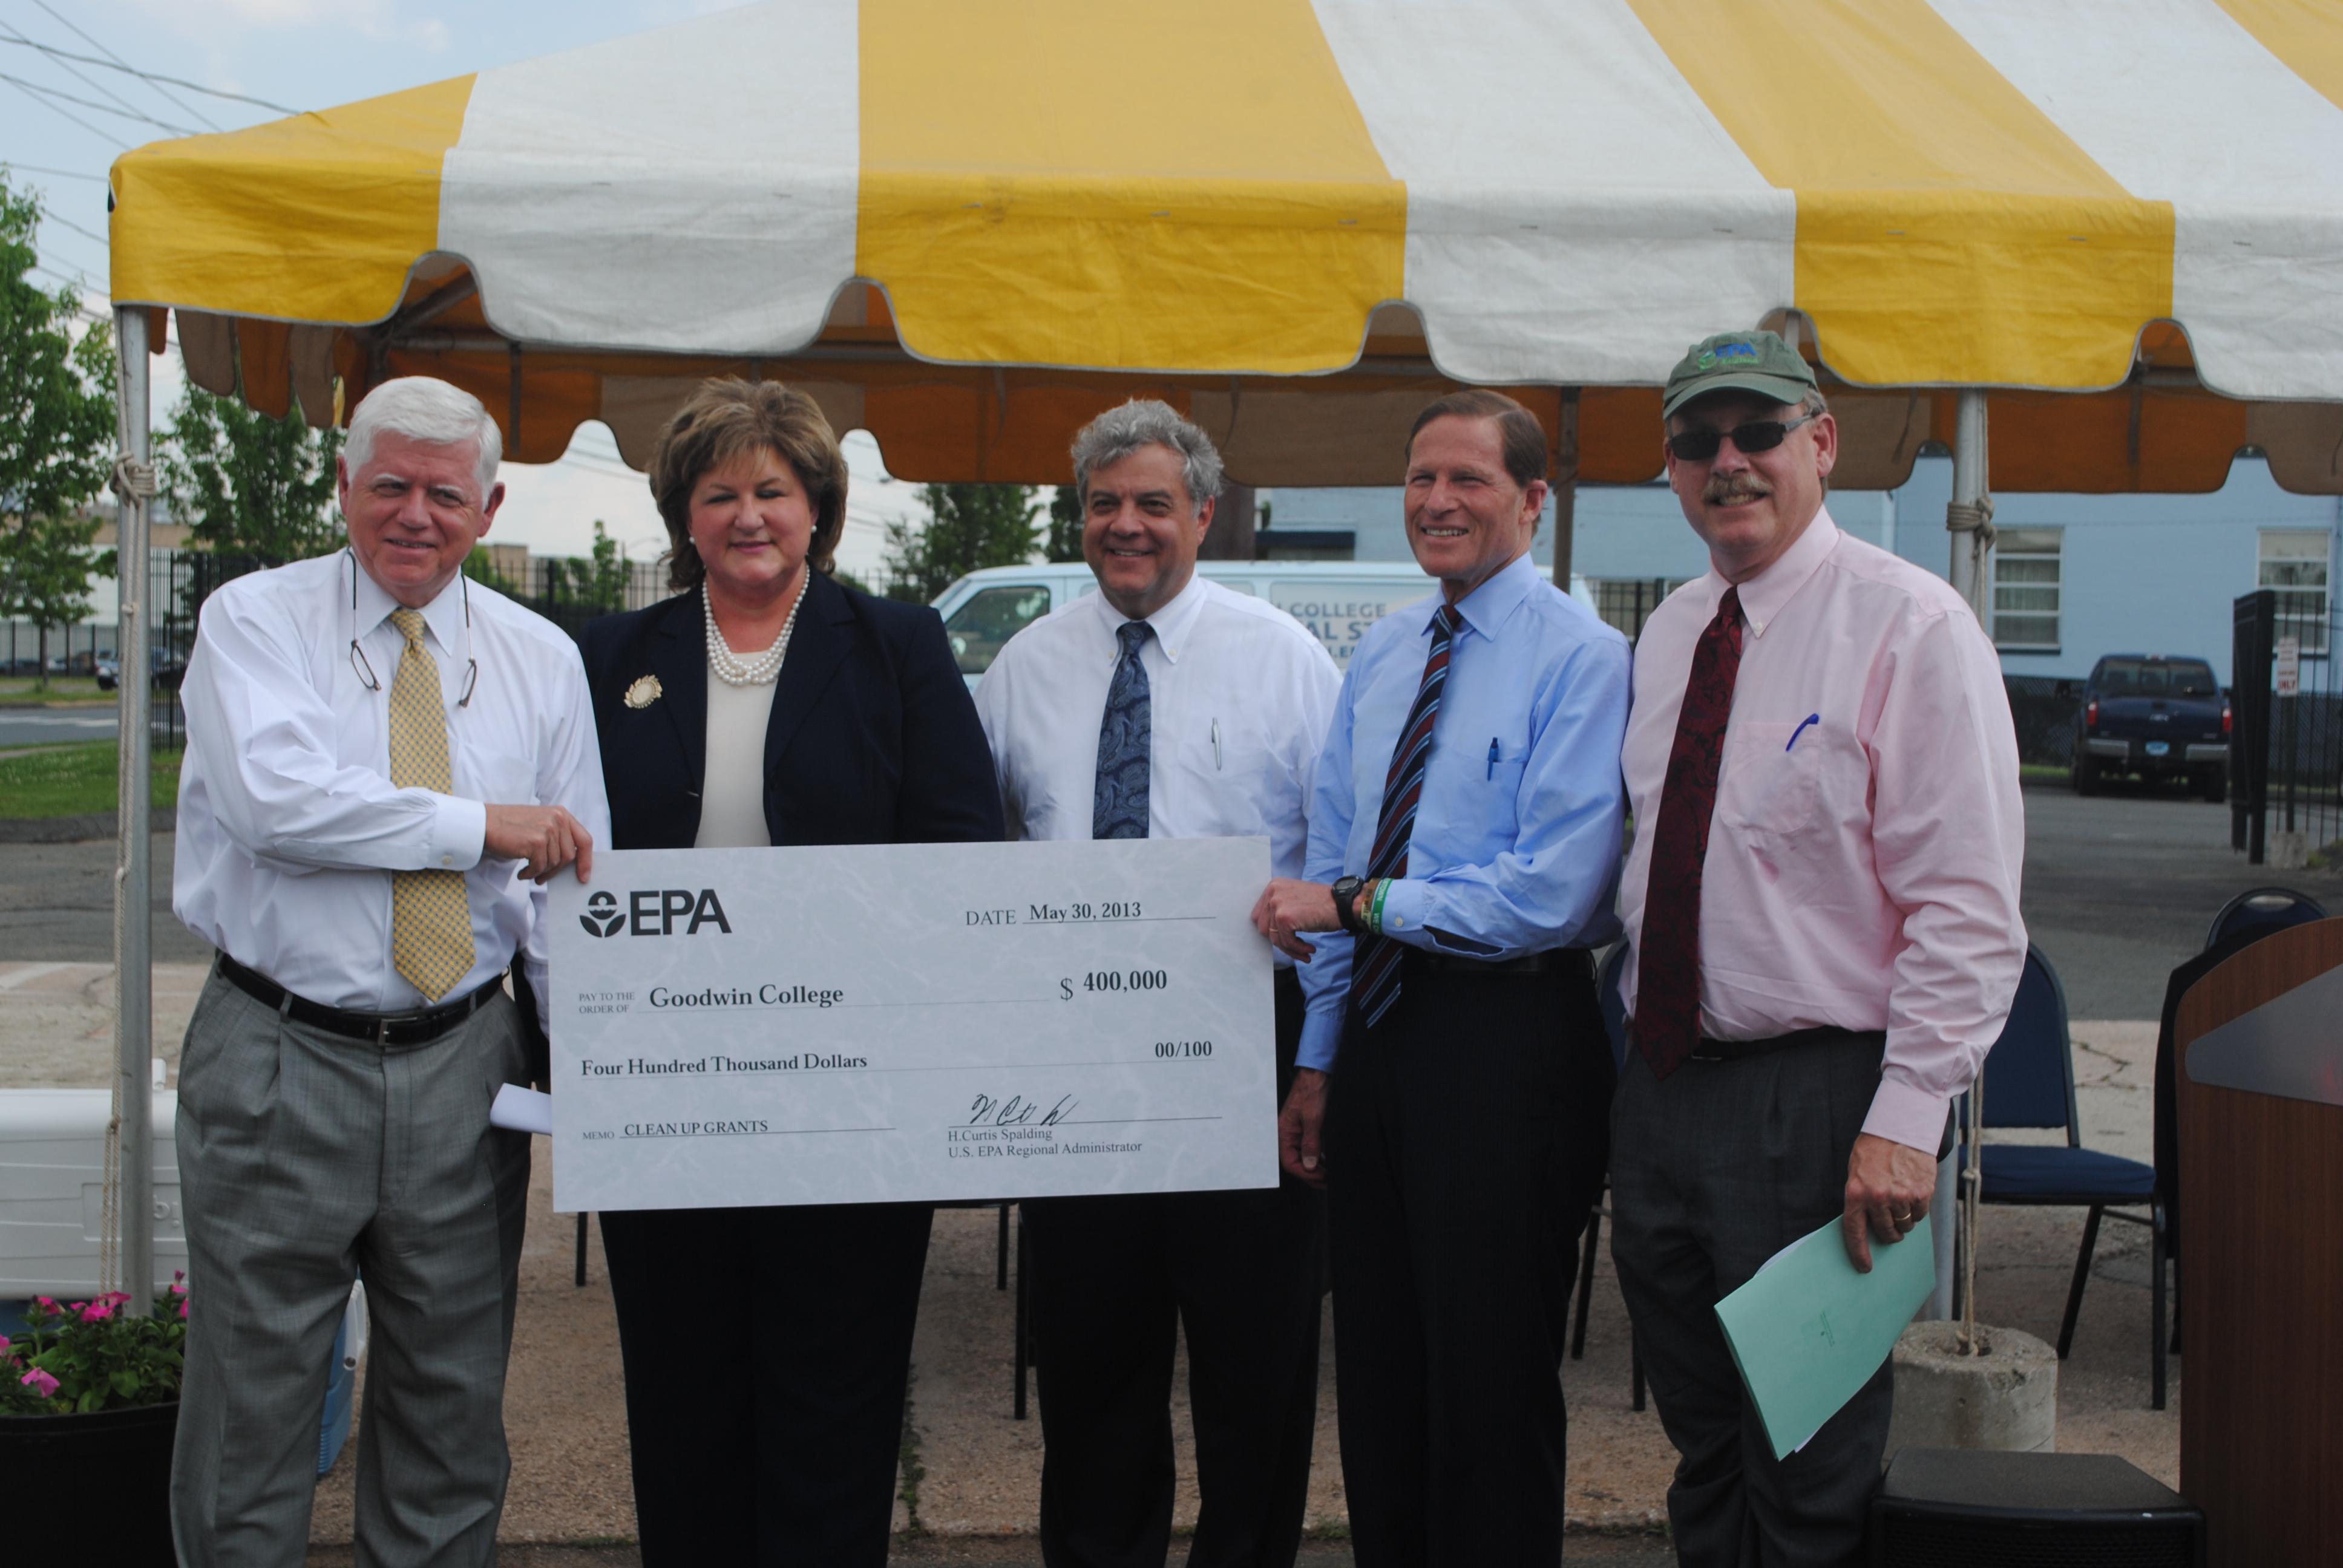 Rep. Larson Awards Goodwin College with an EPA Grant to help Cleanup an East Hartford Brownfields Site